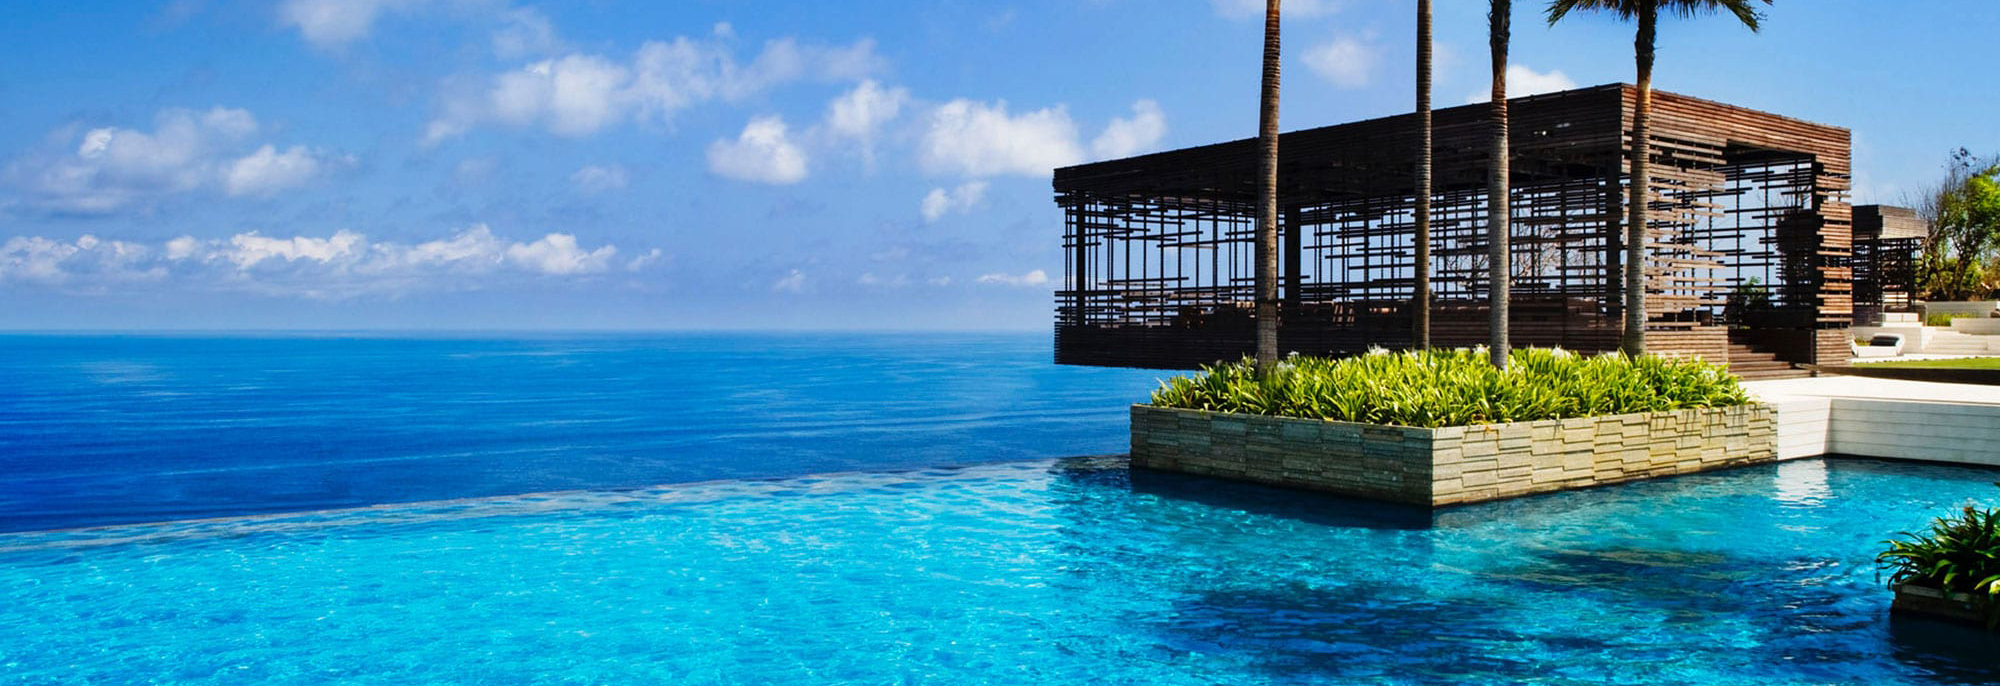 bali vacation packages